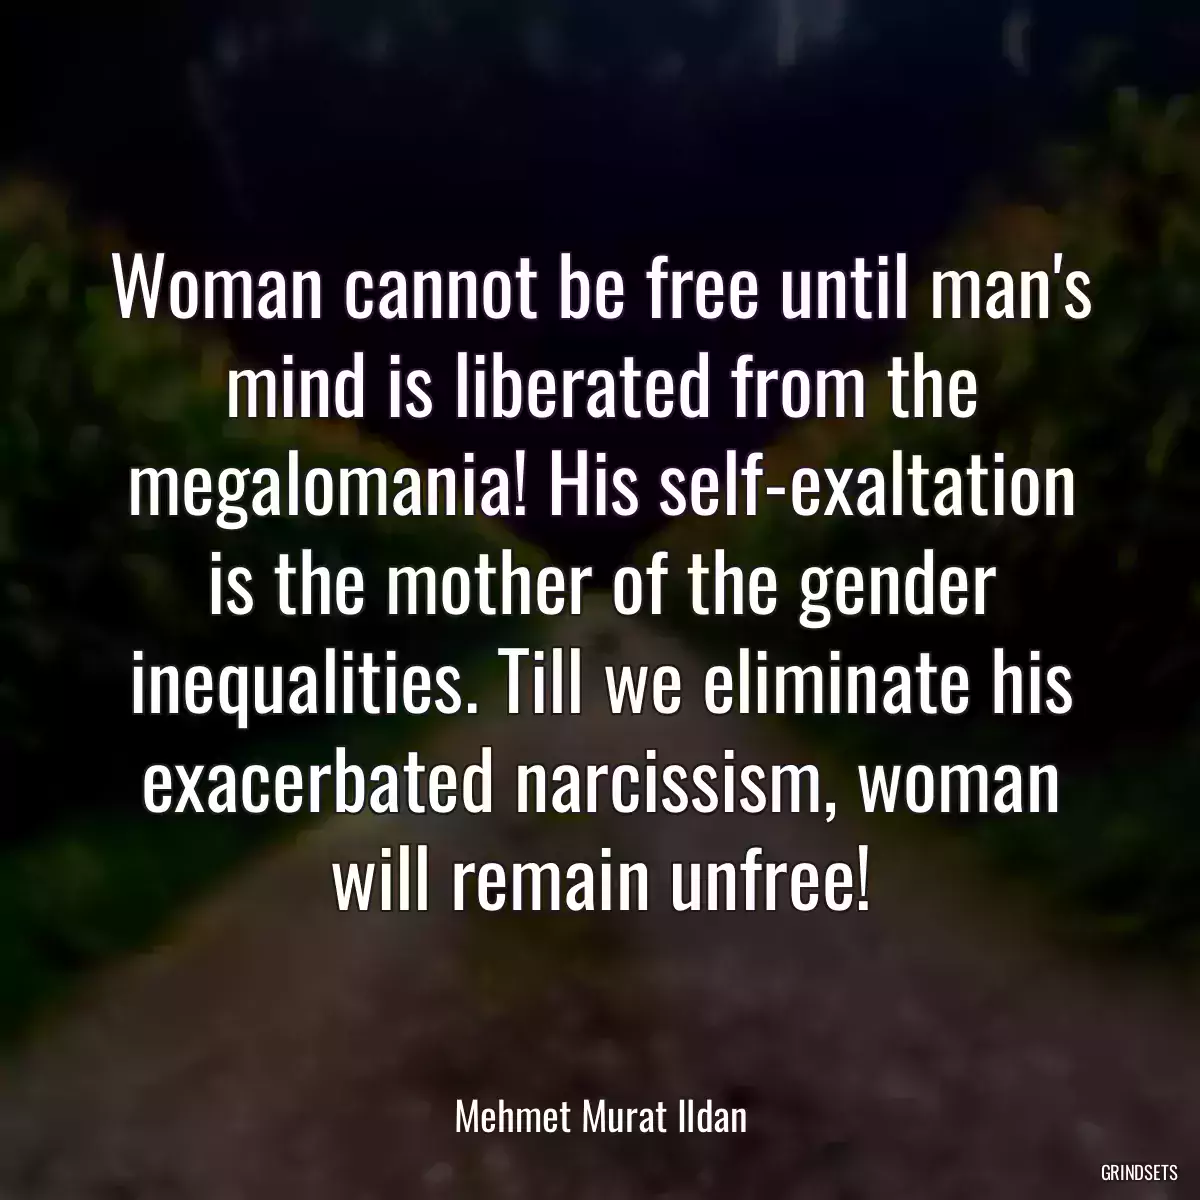 Woman cannot be free until man\'s mind is liberated from the megalomania! His self-exaltation is the mother of the gender inequalities. Till we eliminate his exacerbated narcissism, woman will remain unfree!